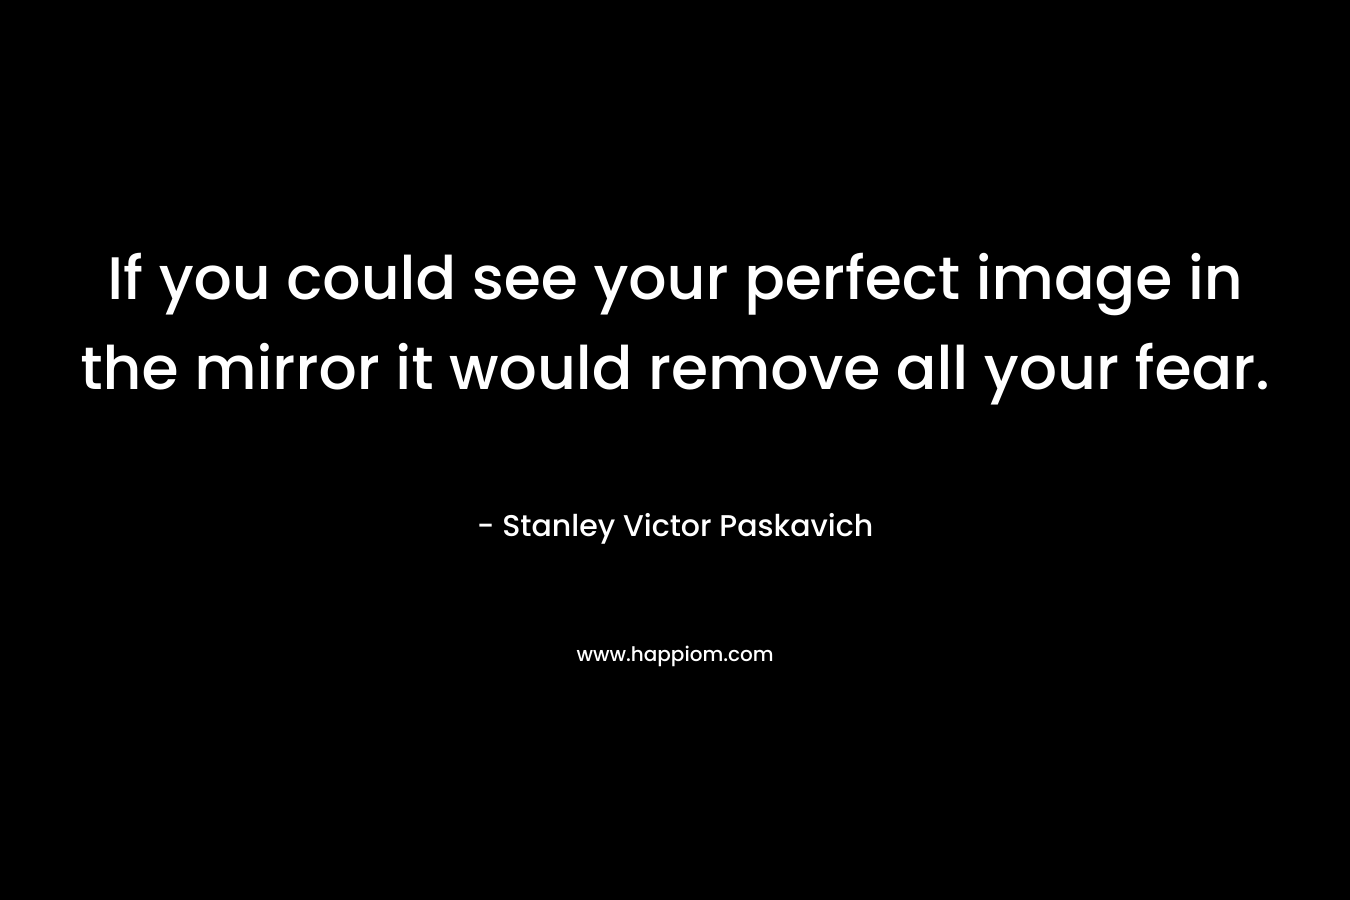 If you could see your perfect image in the mirror it would remove all your fear.